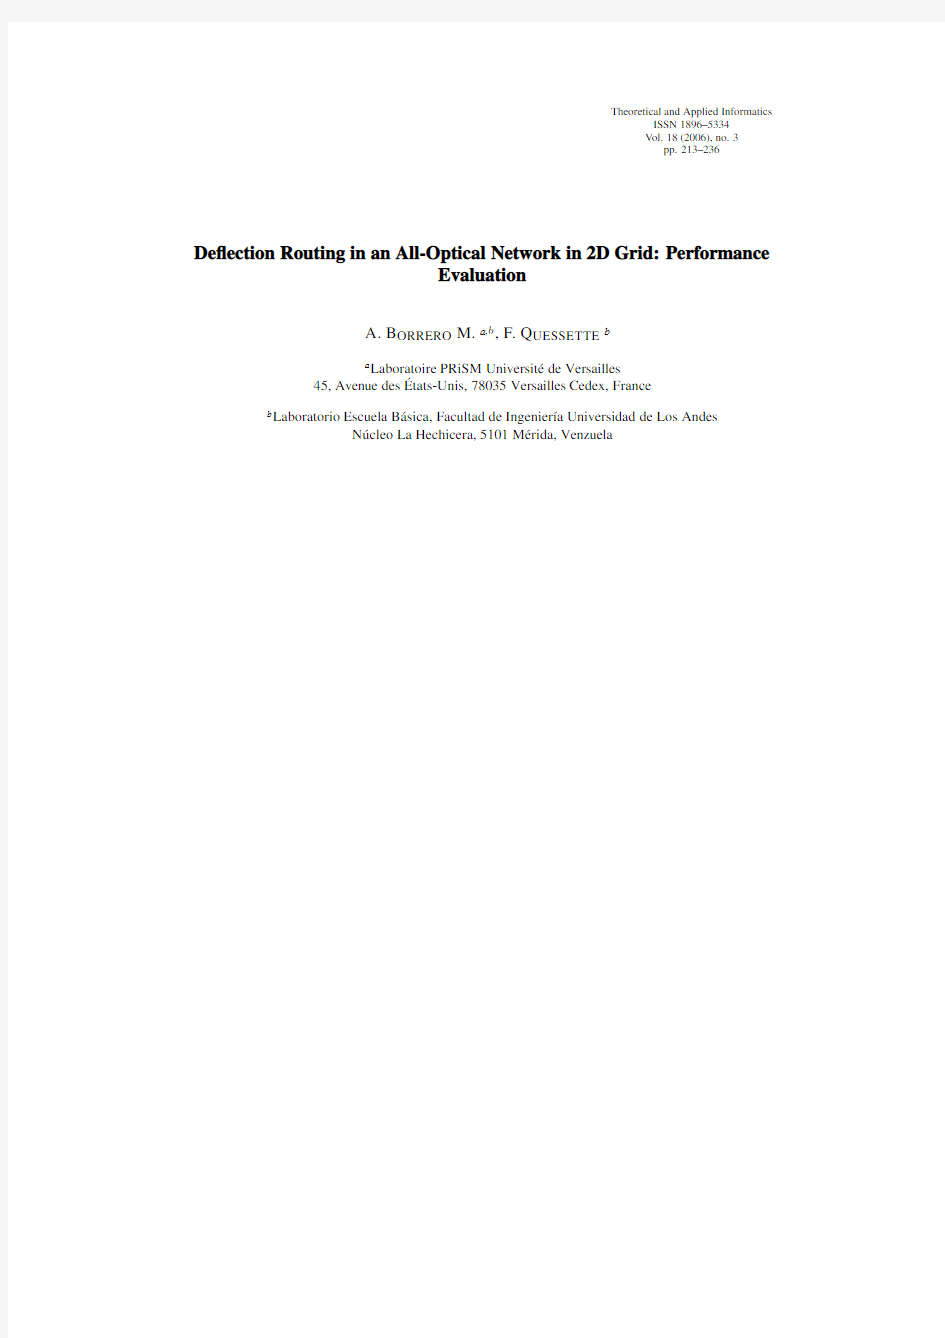 Deflection Routing in an All-Optical Network in 2D Grid Performance Evaluation